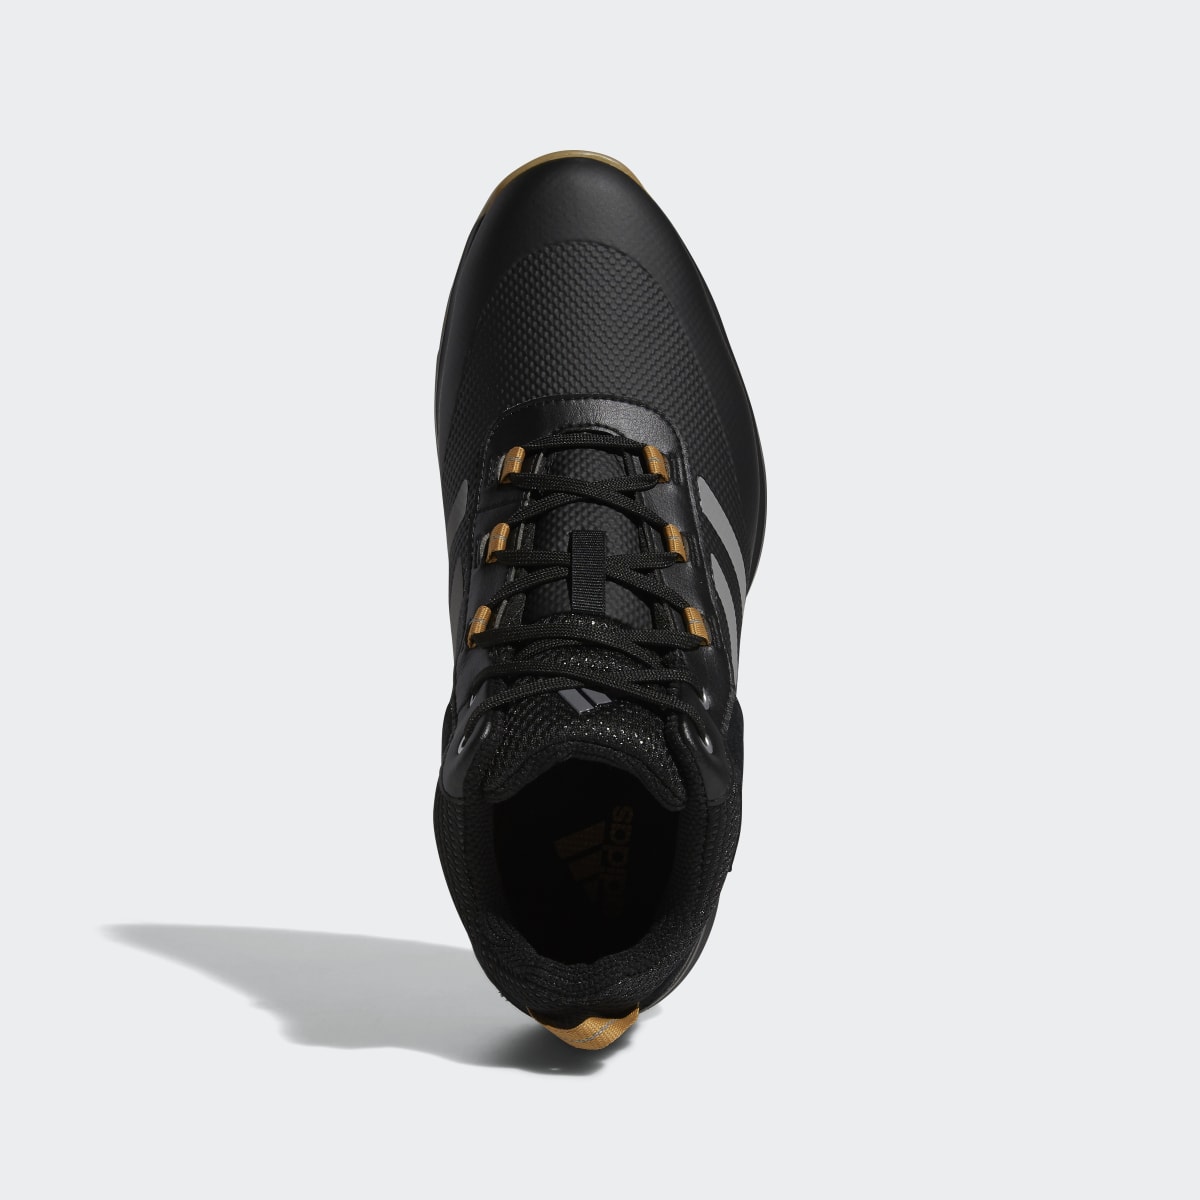 Adidas S2G Recycled Polyester Mid-Cut Golf Shoes. 5